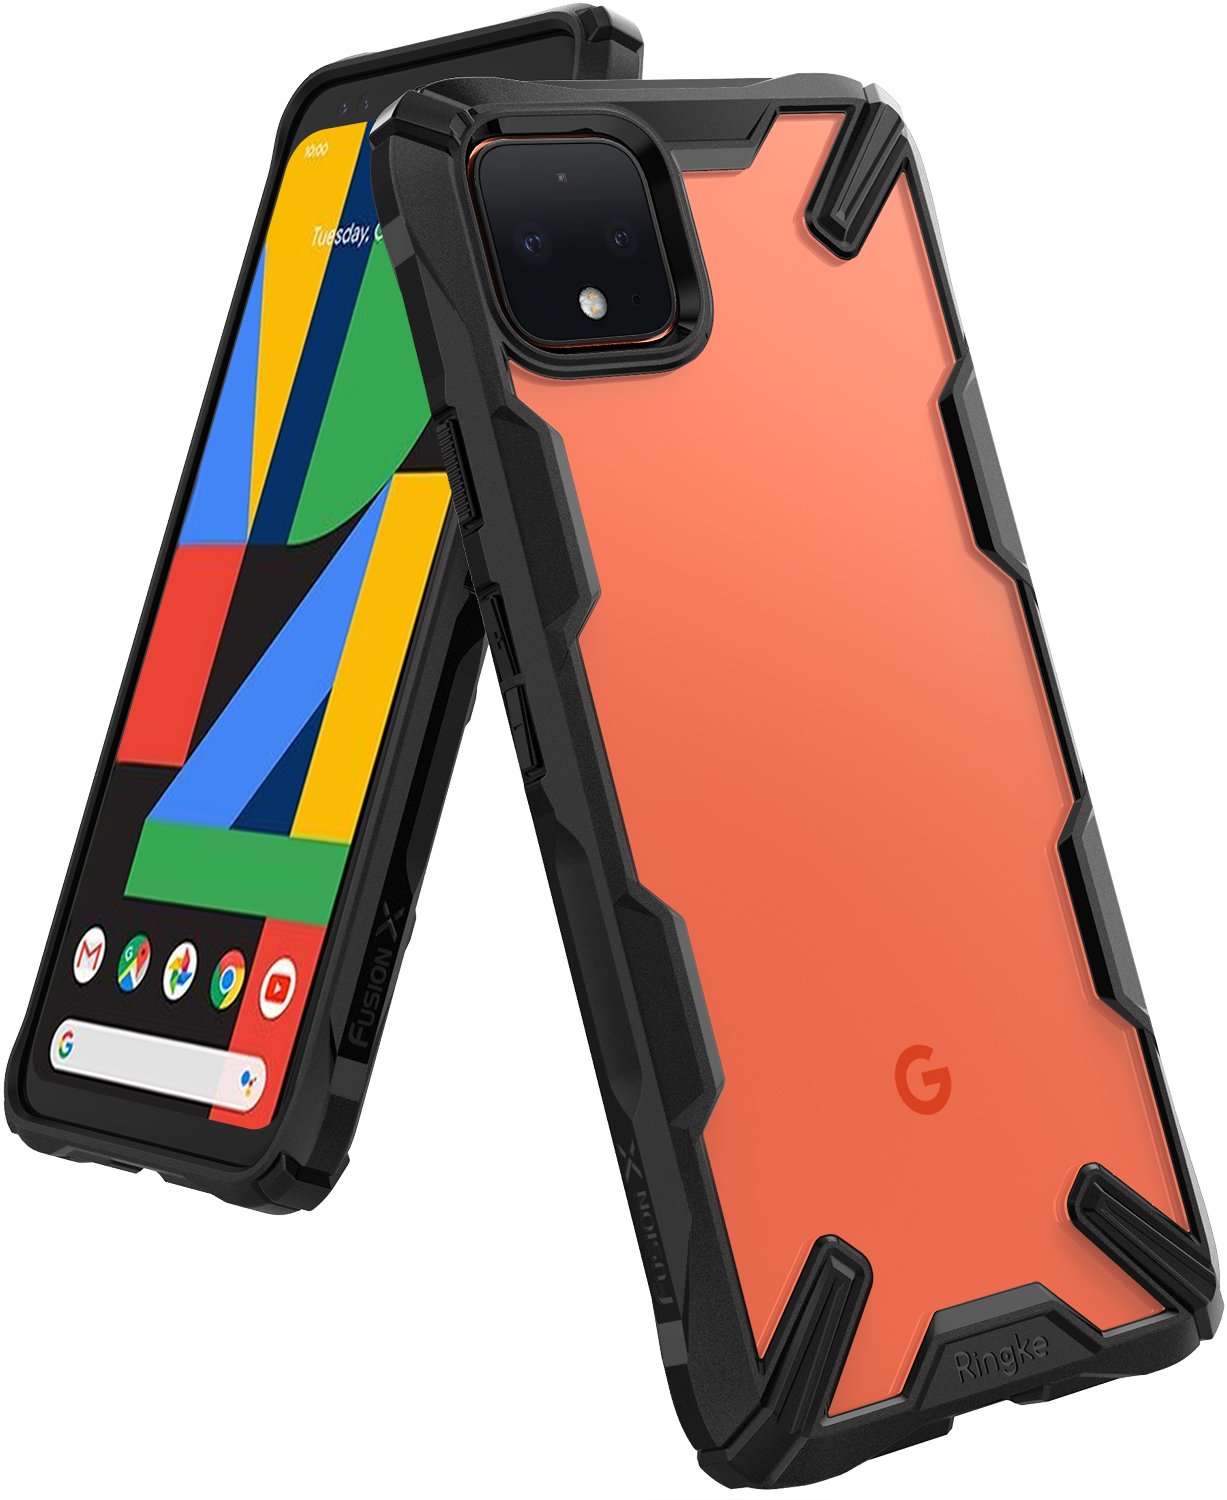 Ringke Fusion-X Case compatible with Google Pixel 4 XL, Black